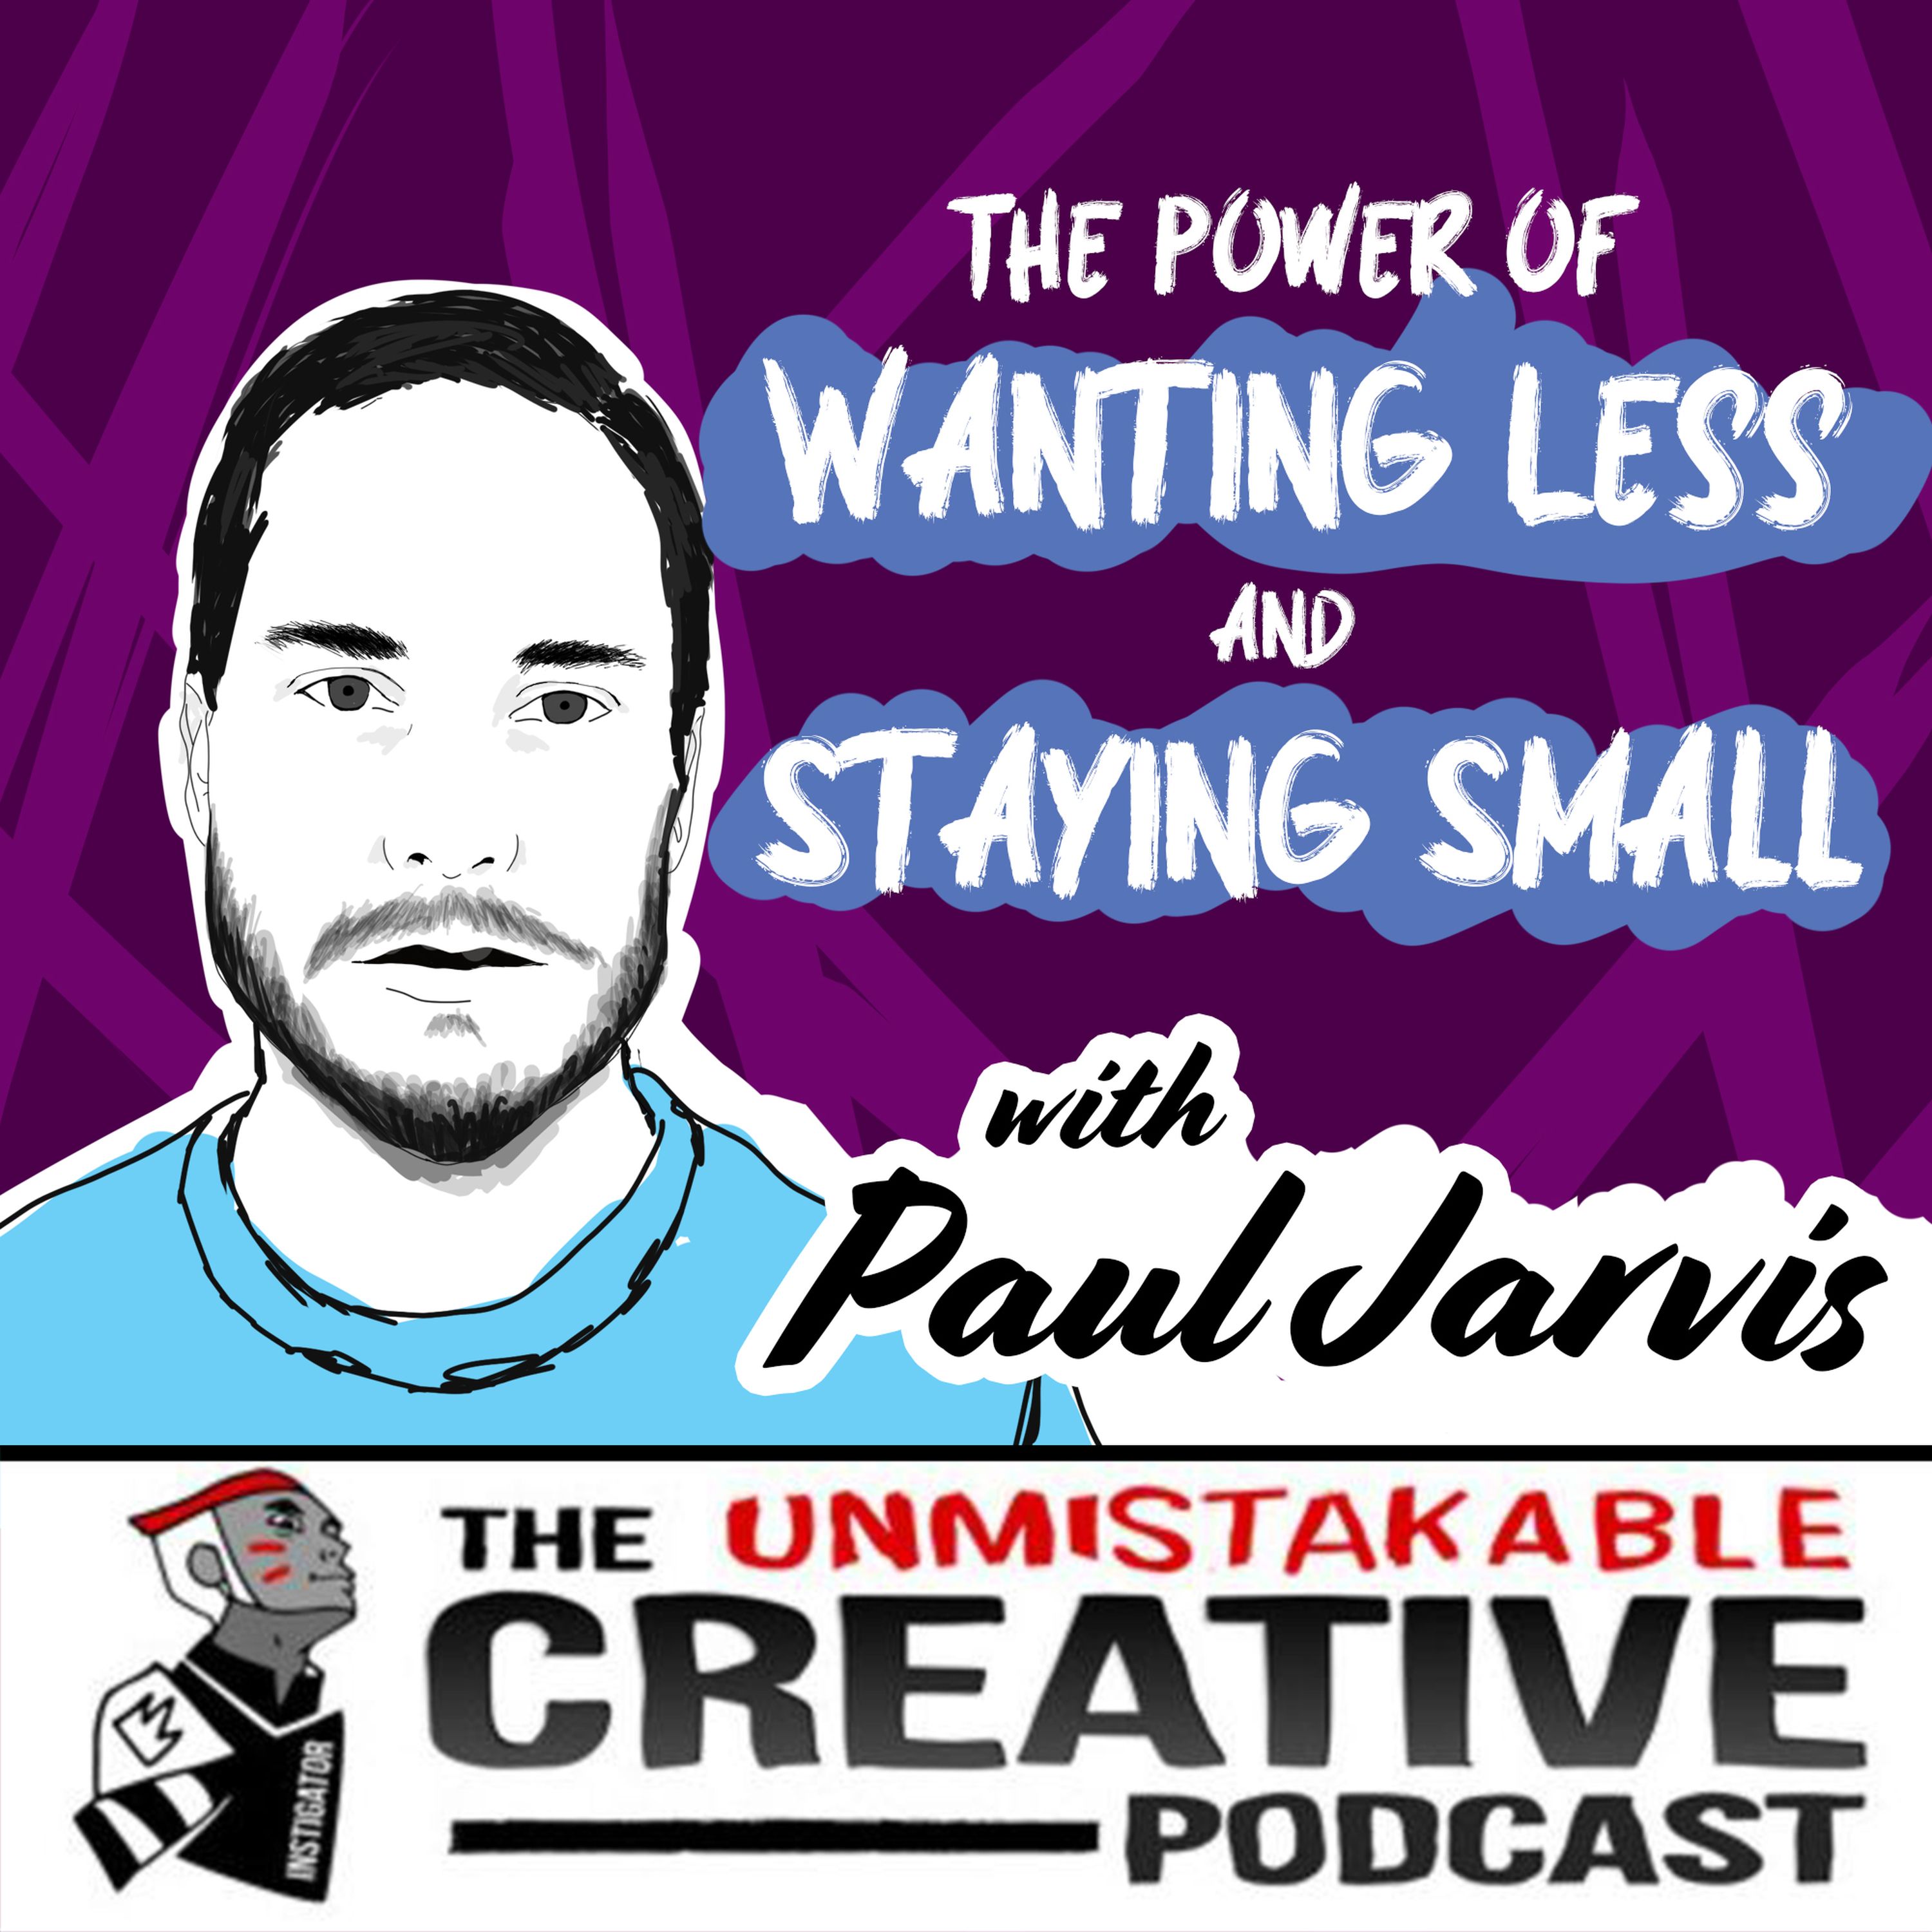 The Power of Wanting Less and Staying Small with Paul Jarvis Image